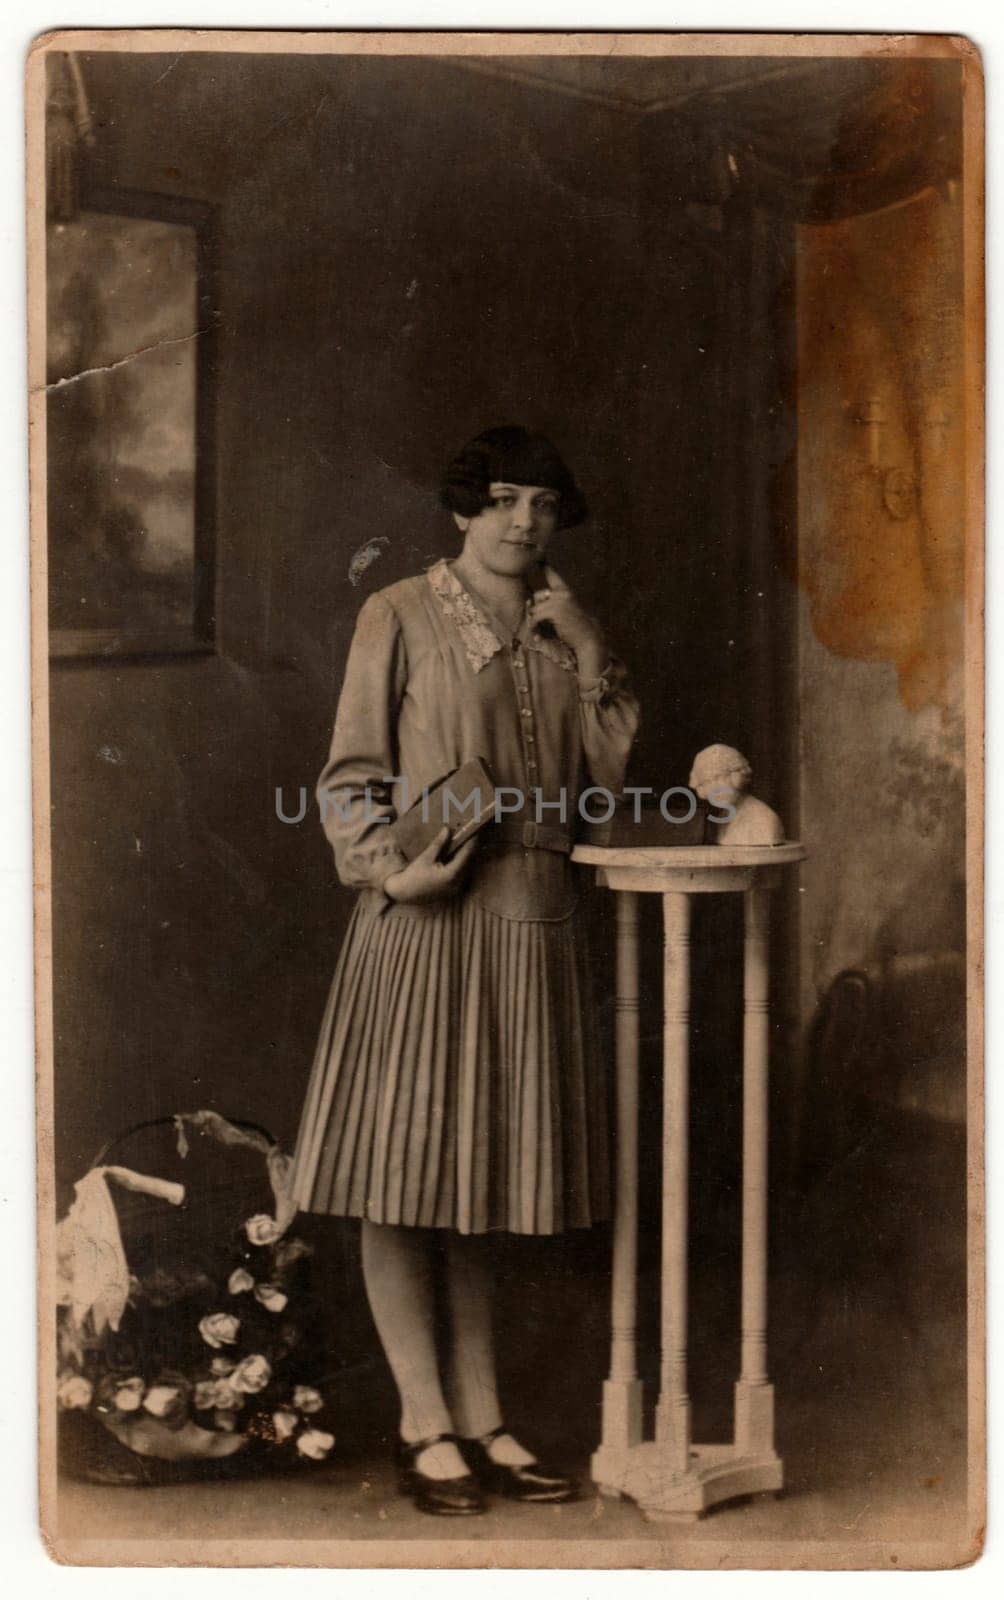 GERMANY - CIRCA 1930s: Vintage photo shows woman in a photography studio. Retro black and white studio photography with sepia effect.